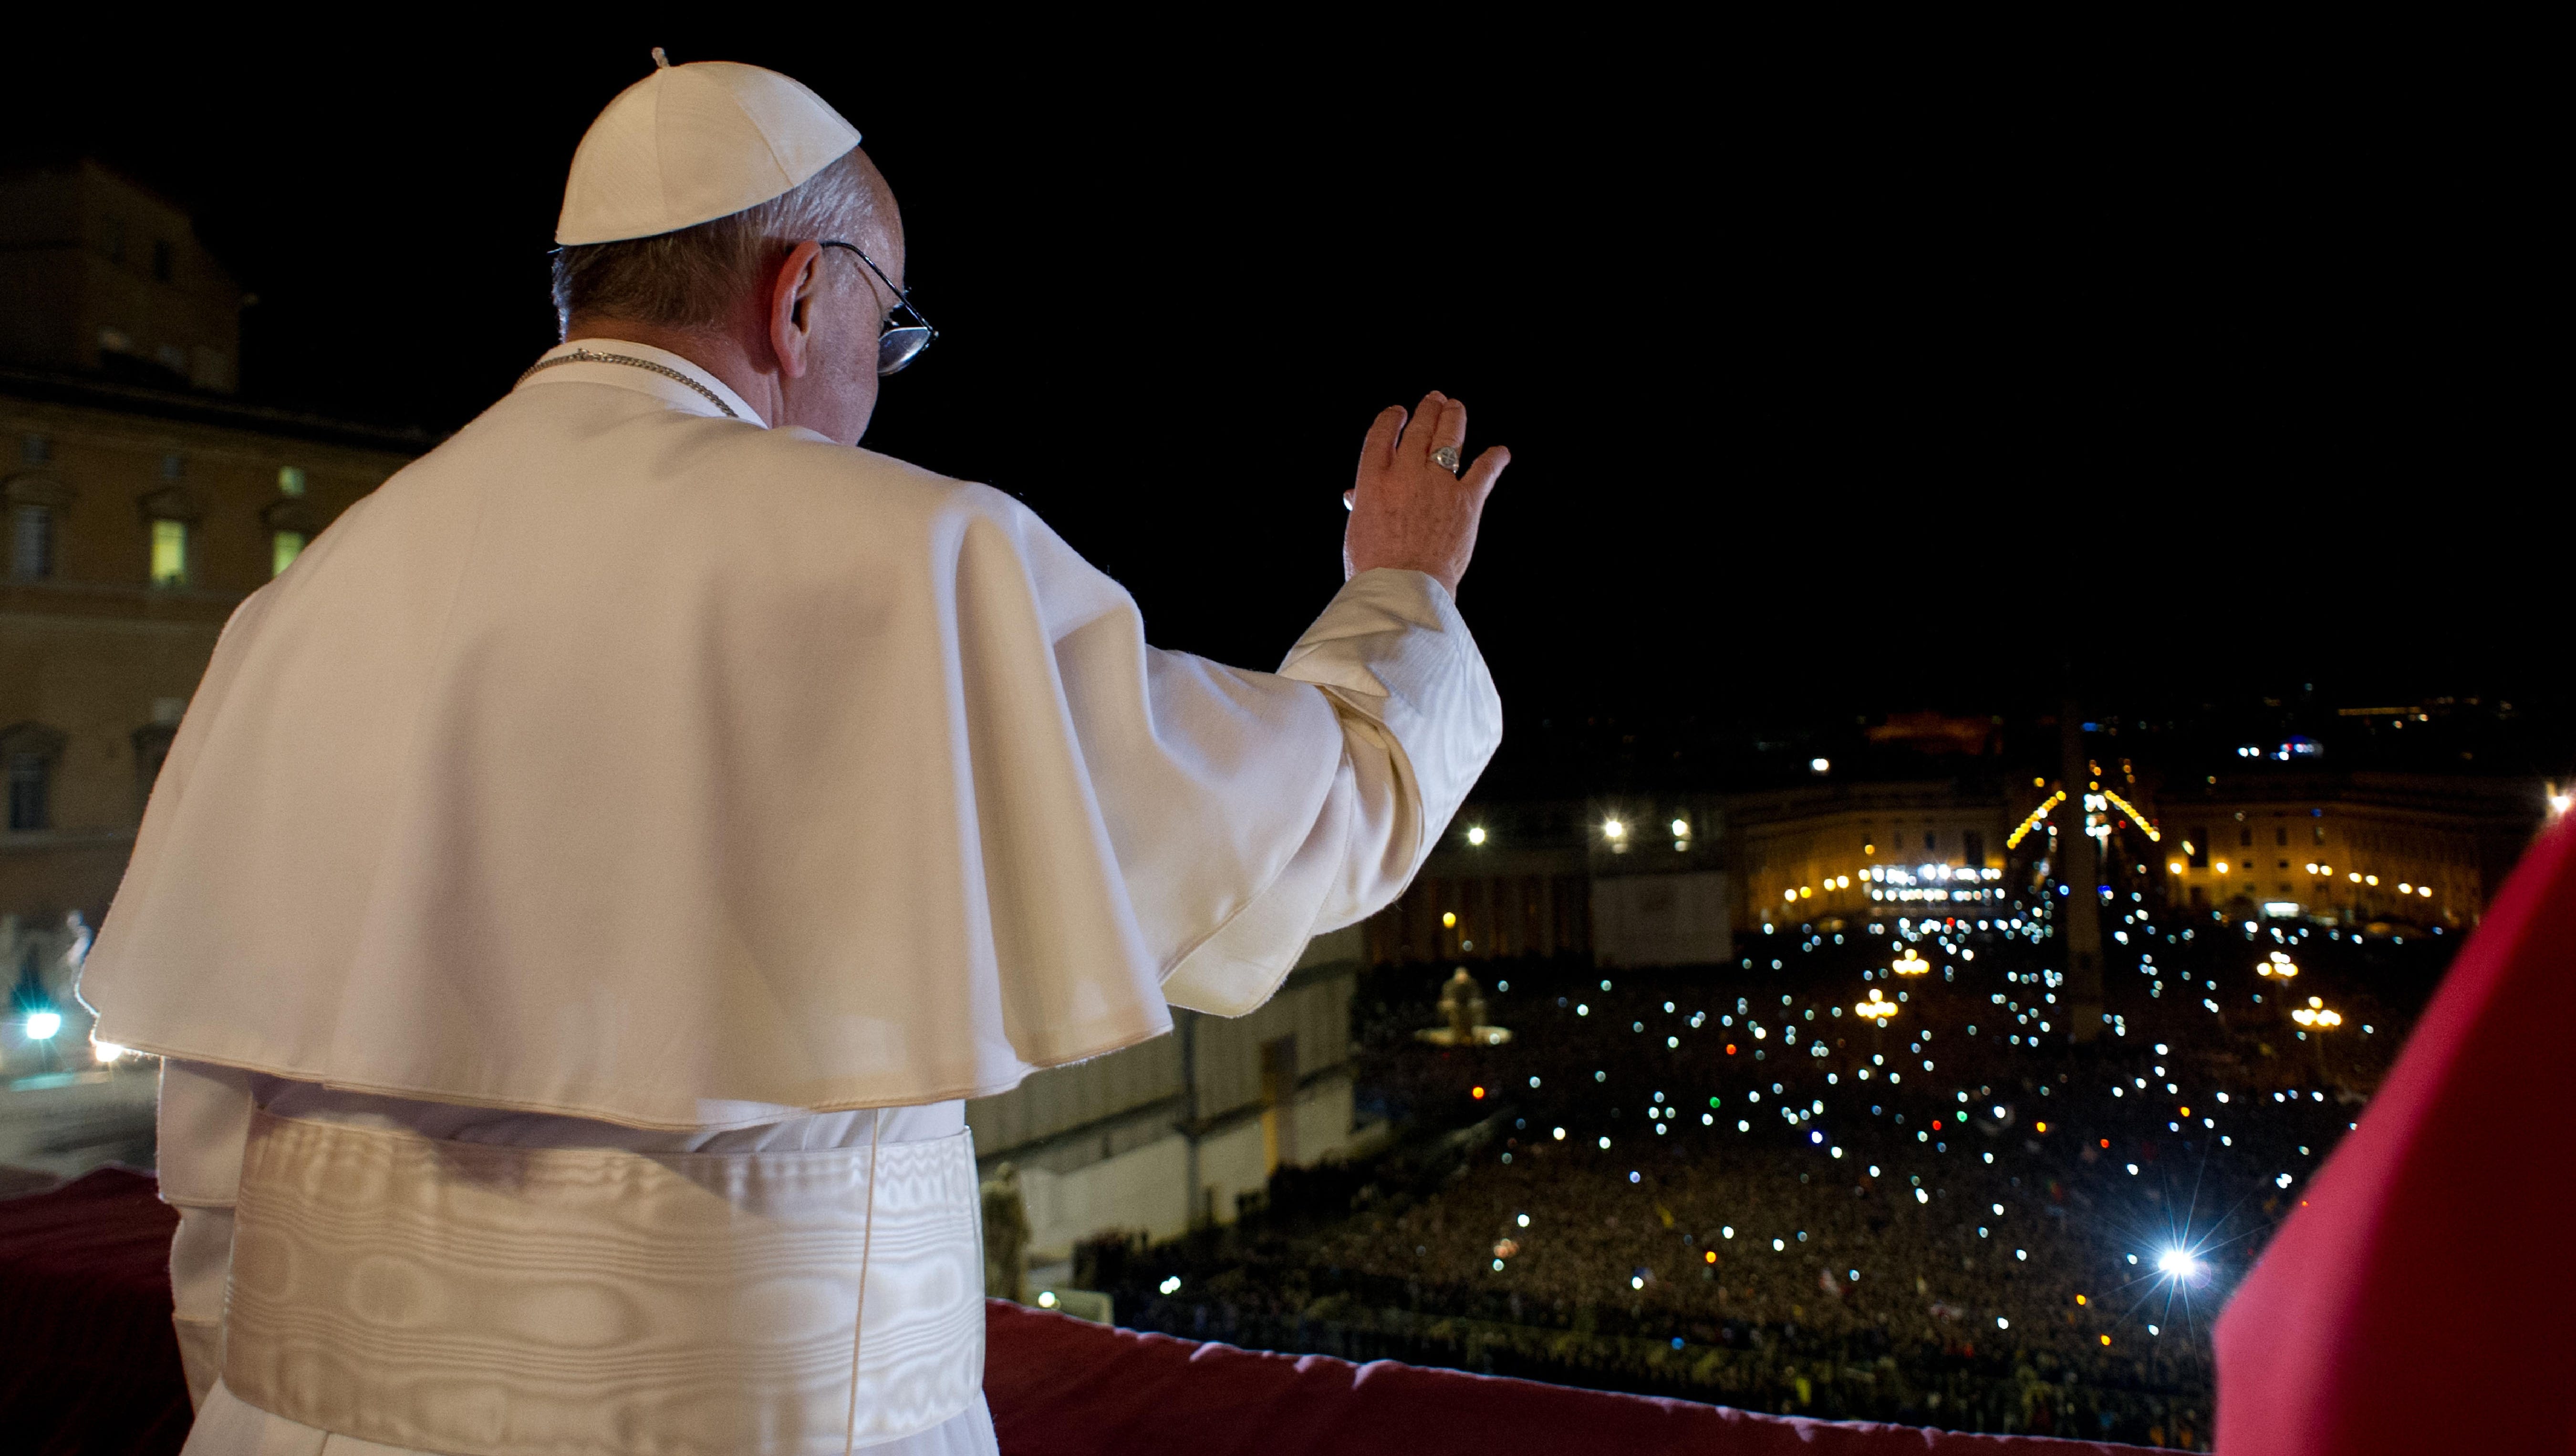 The story behind Pope Francis'